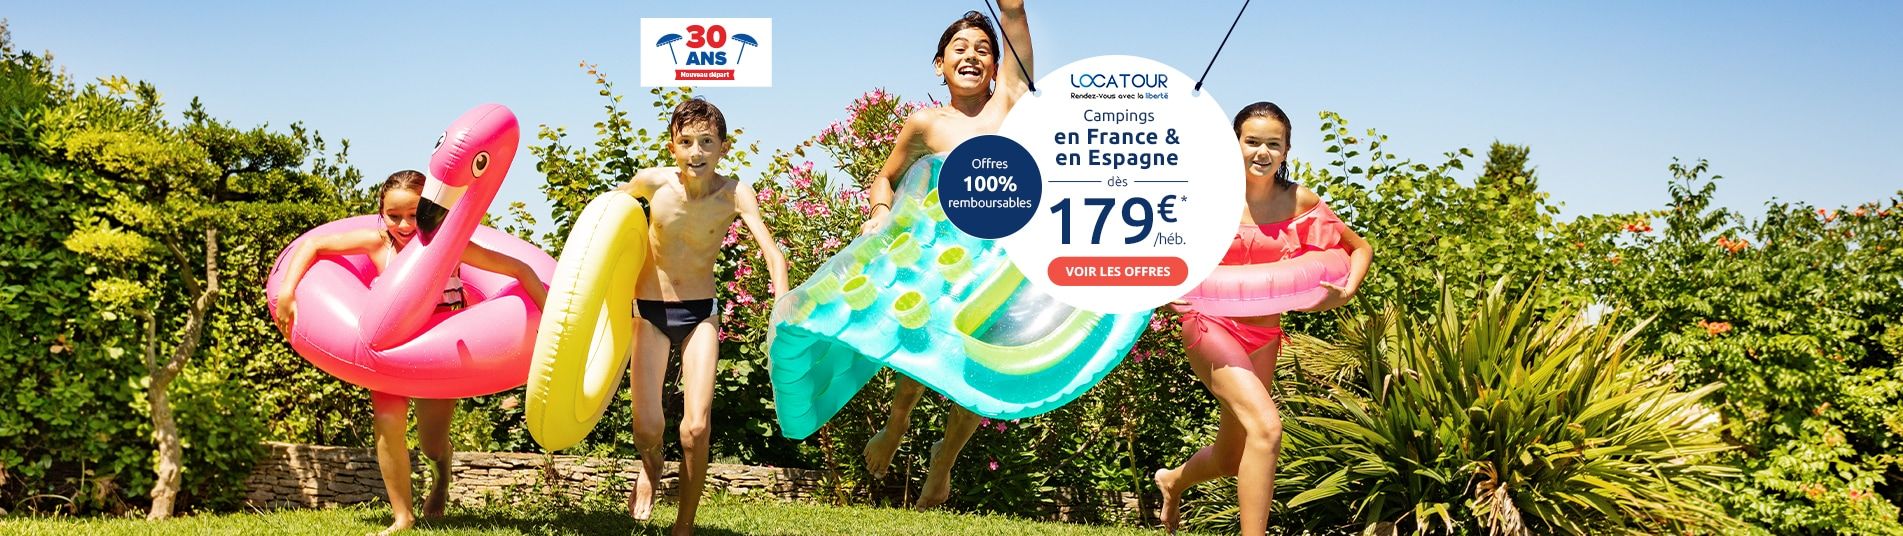 carrefour voyage camping france